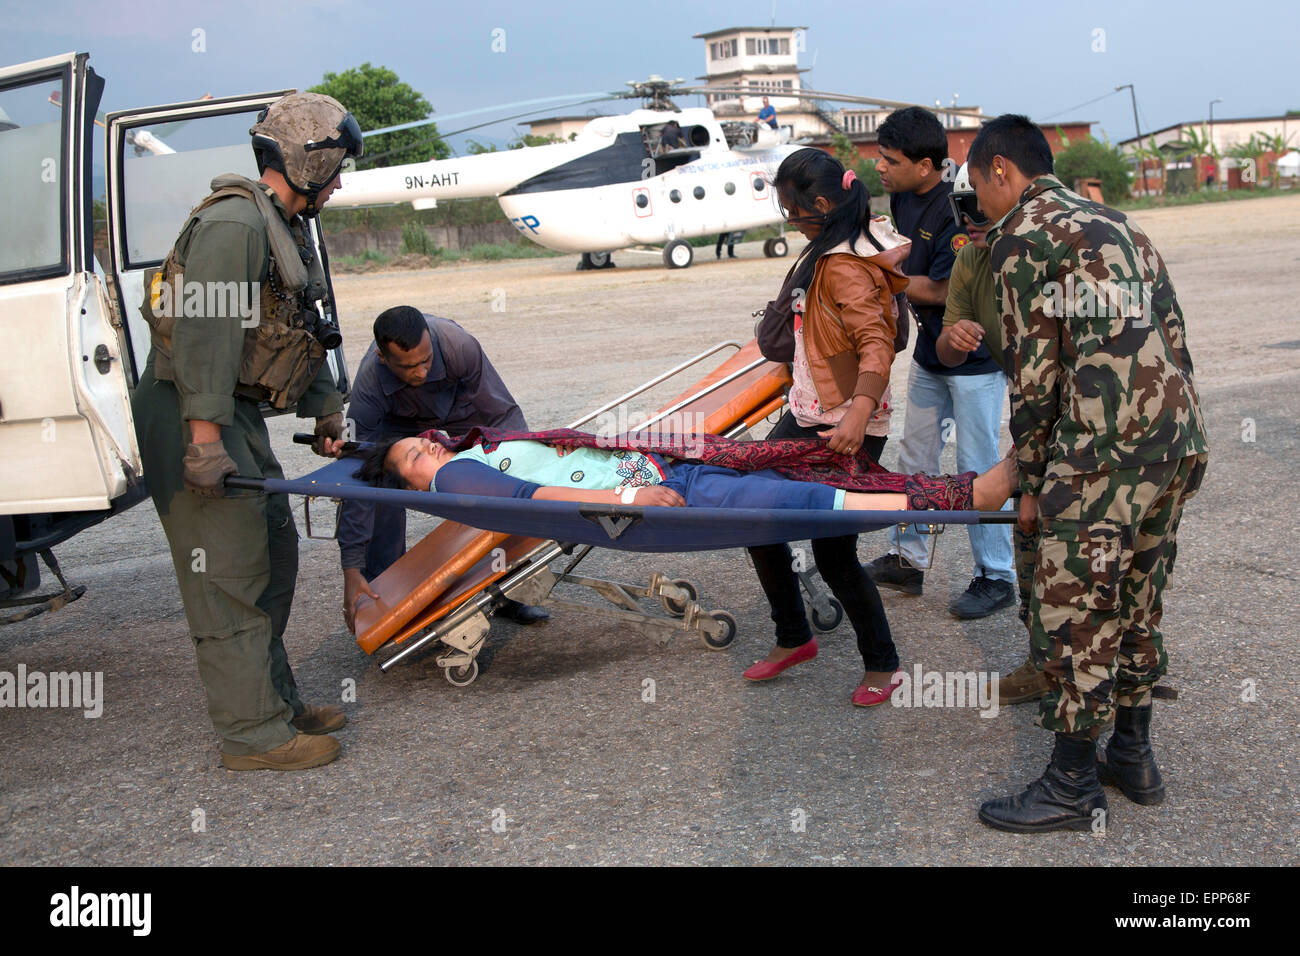 U.S. service members from Joint Task Force 505 and Nepalese soldiers move a victim onto an ambulance at Tribhuvan International Airport May 19, 2015 in Kathmandu, Nepal. A 7.3 magnitude aftershock earthquake struck the kingdom on May 12th following the 7.8 magnitude earthquake on April 25th. Stock Photo